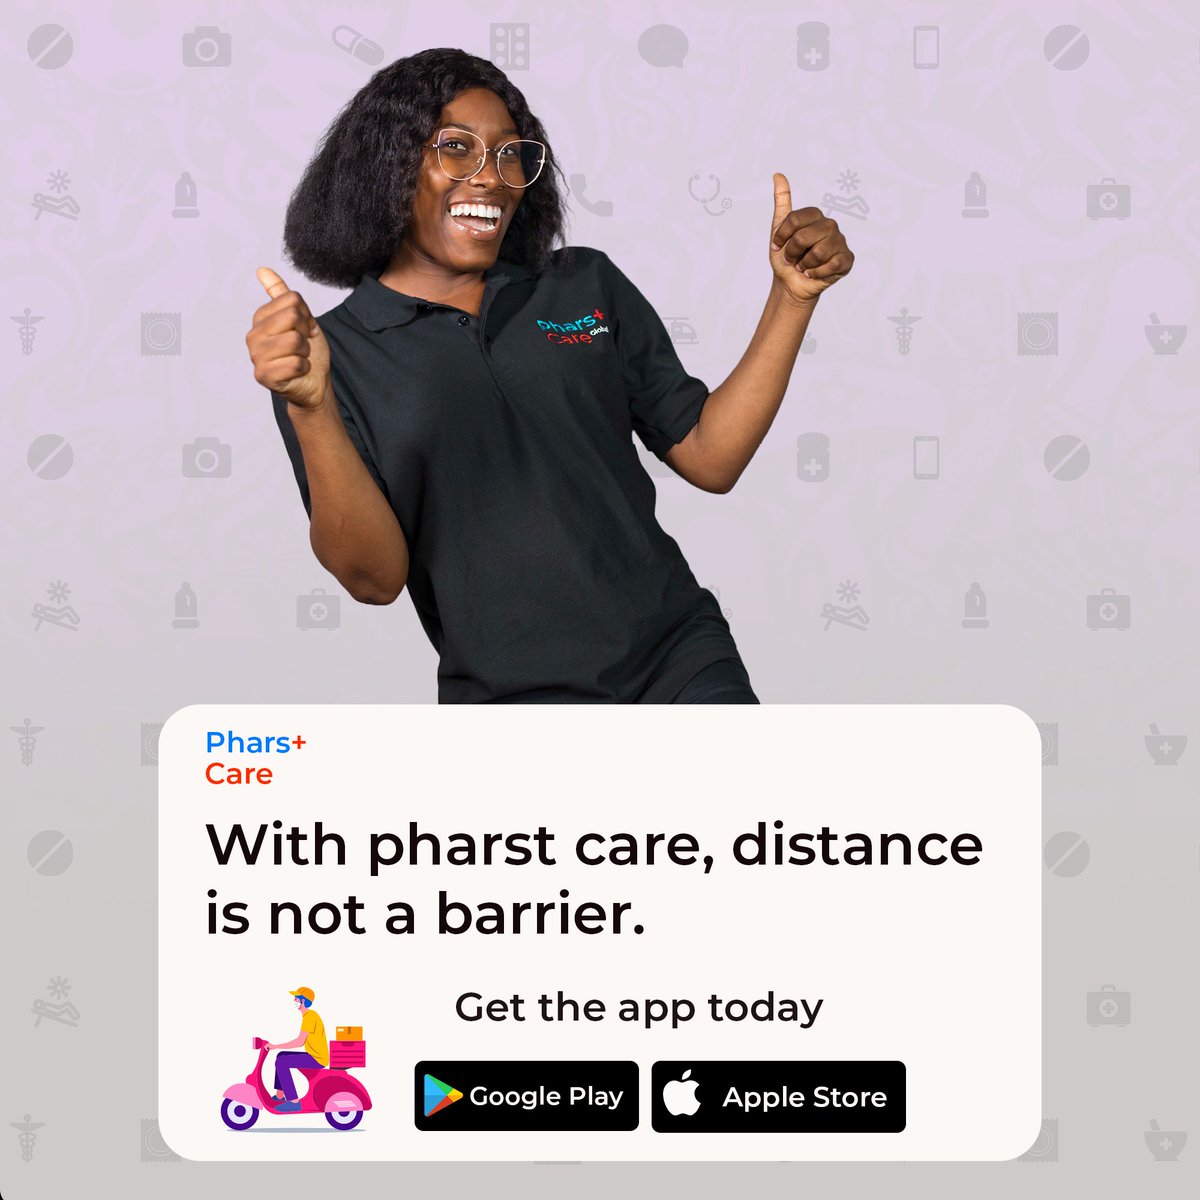 Distance? Barrier? No! With the e-pharmacy in your pocket, nothing to fear. Get the app on your phone today via app.pharst.care 

#pharstcare #digitalpharmacy #epharmacy